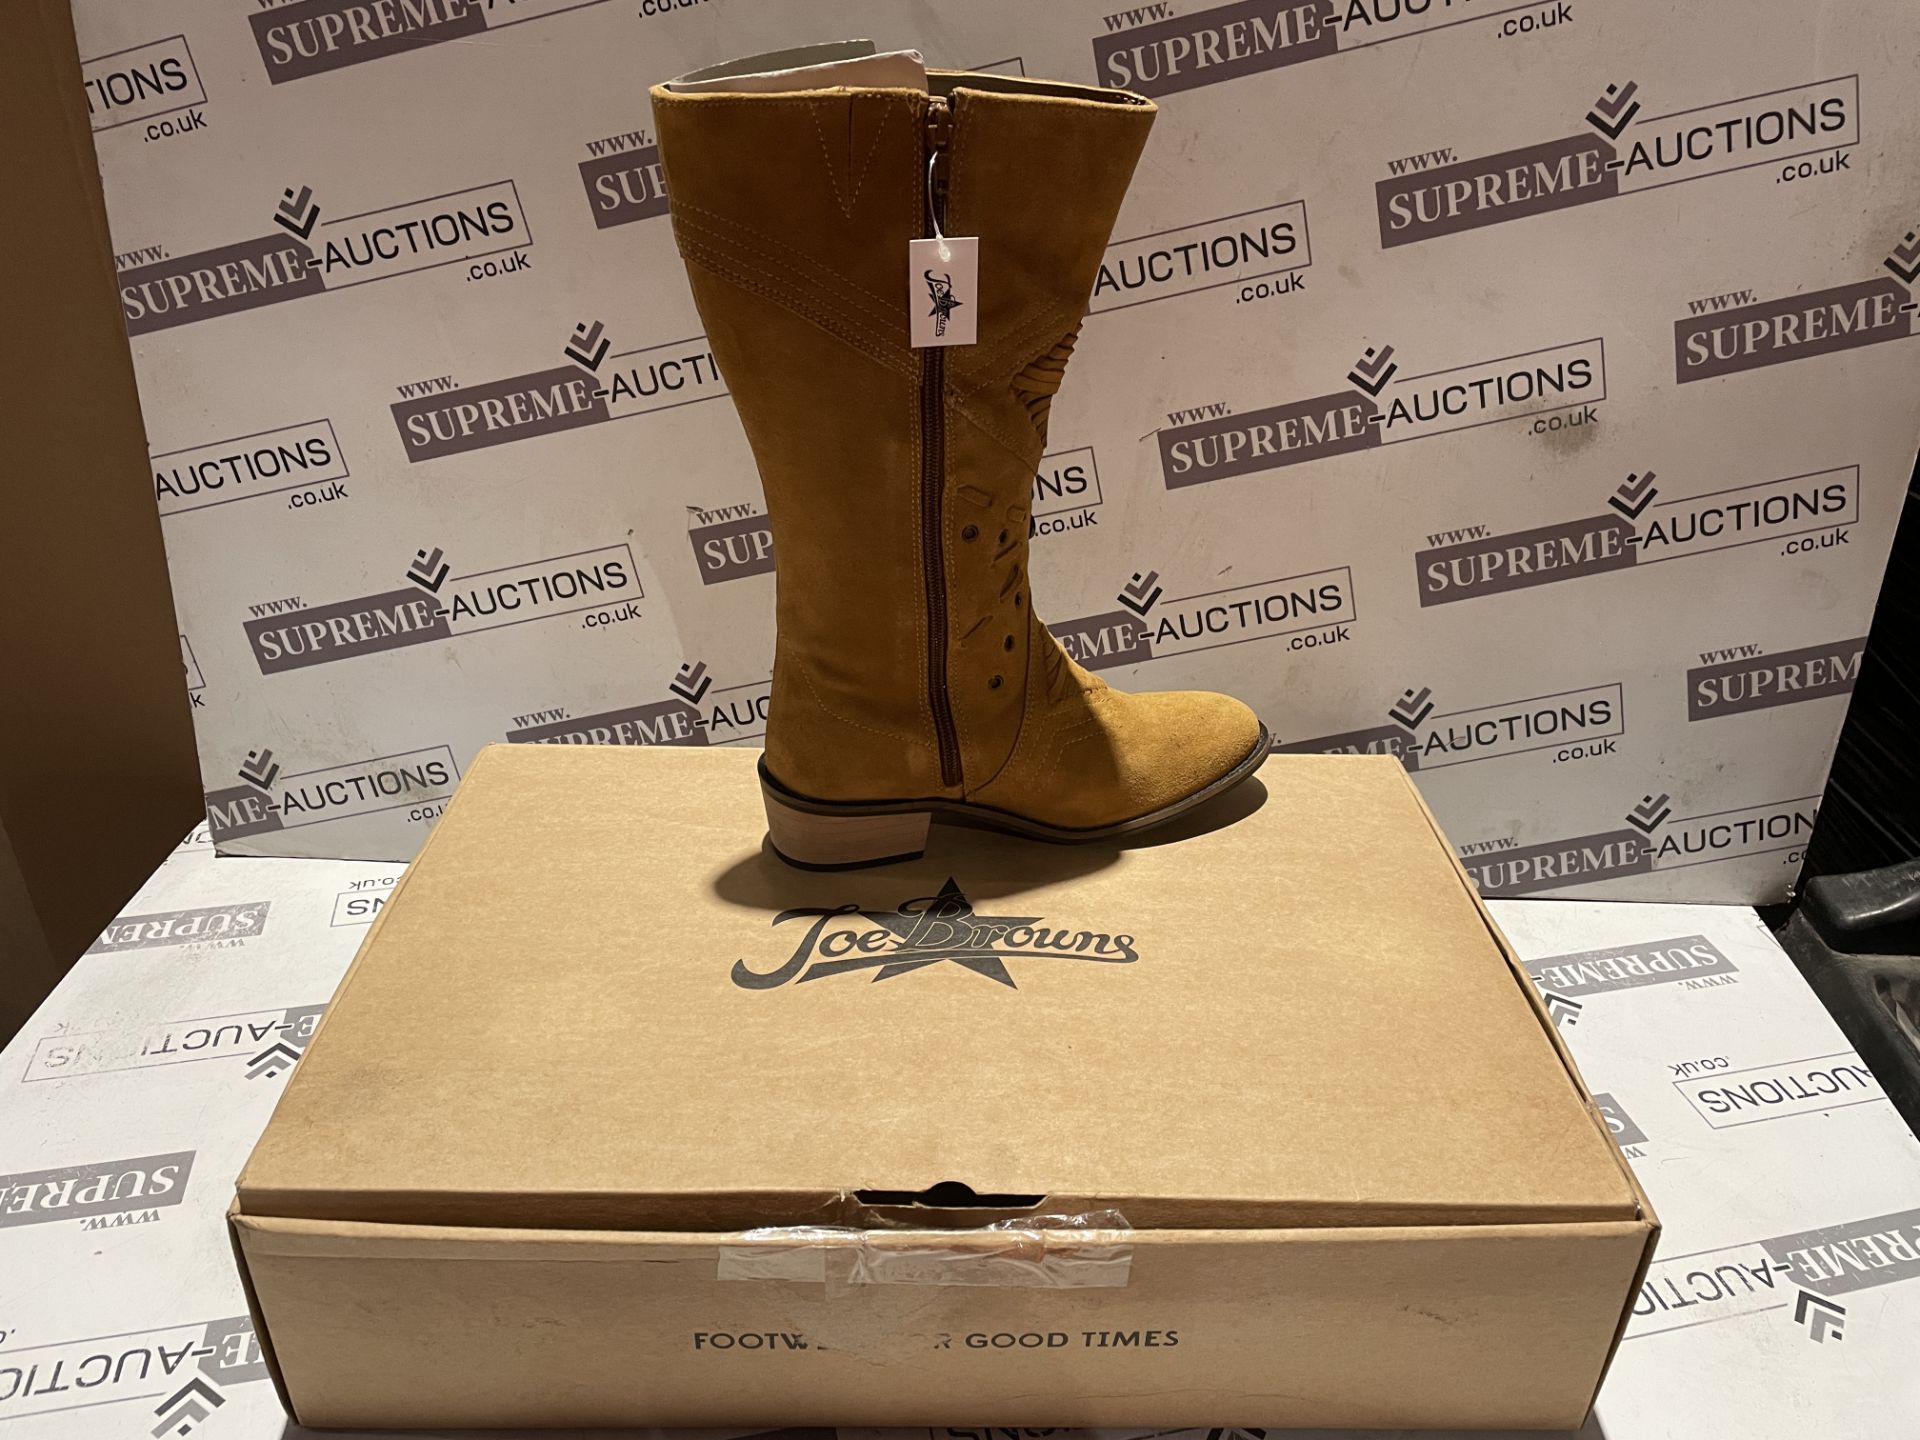 5 X BRAND NEW PAIRS OF JOE BROWNS TAN FASHION BOOTS SIZE 4 R15-3 - Image 2 of 2